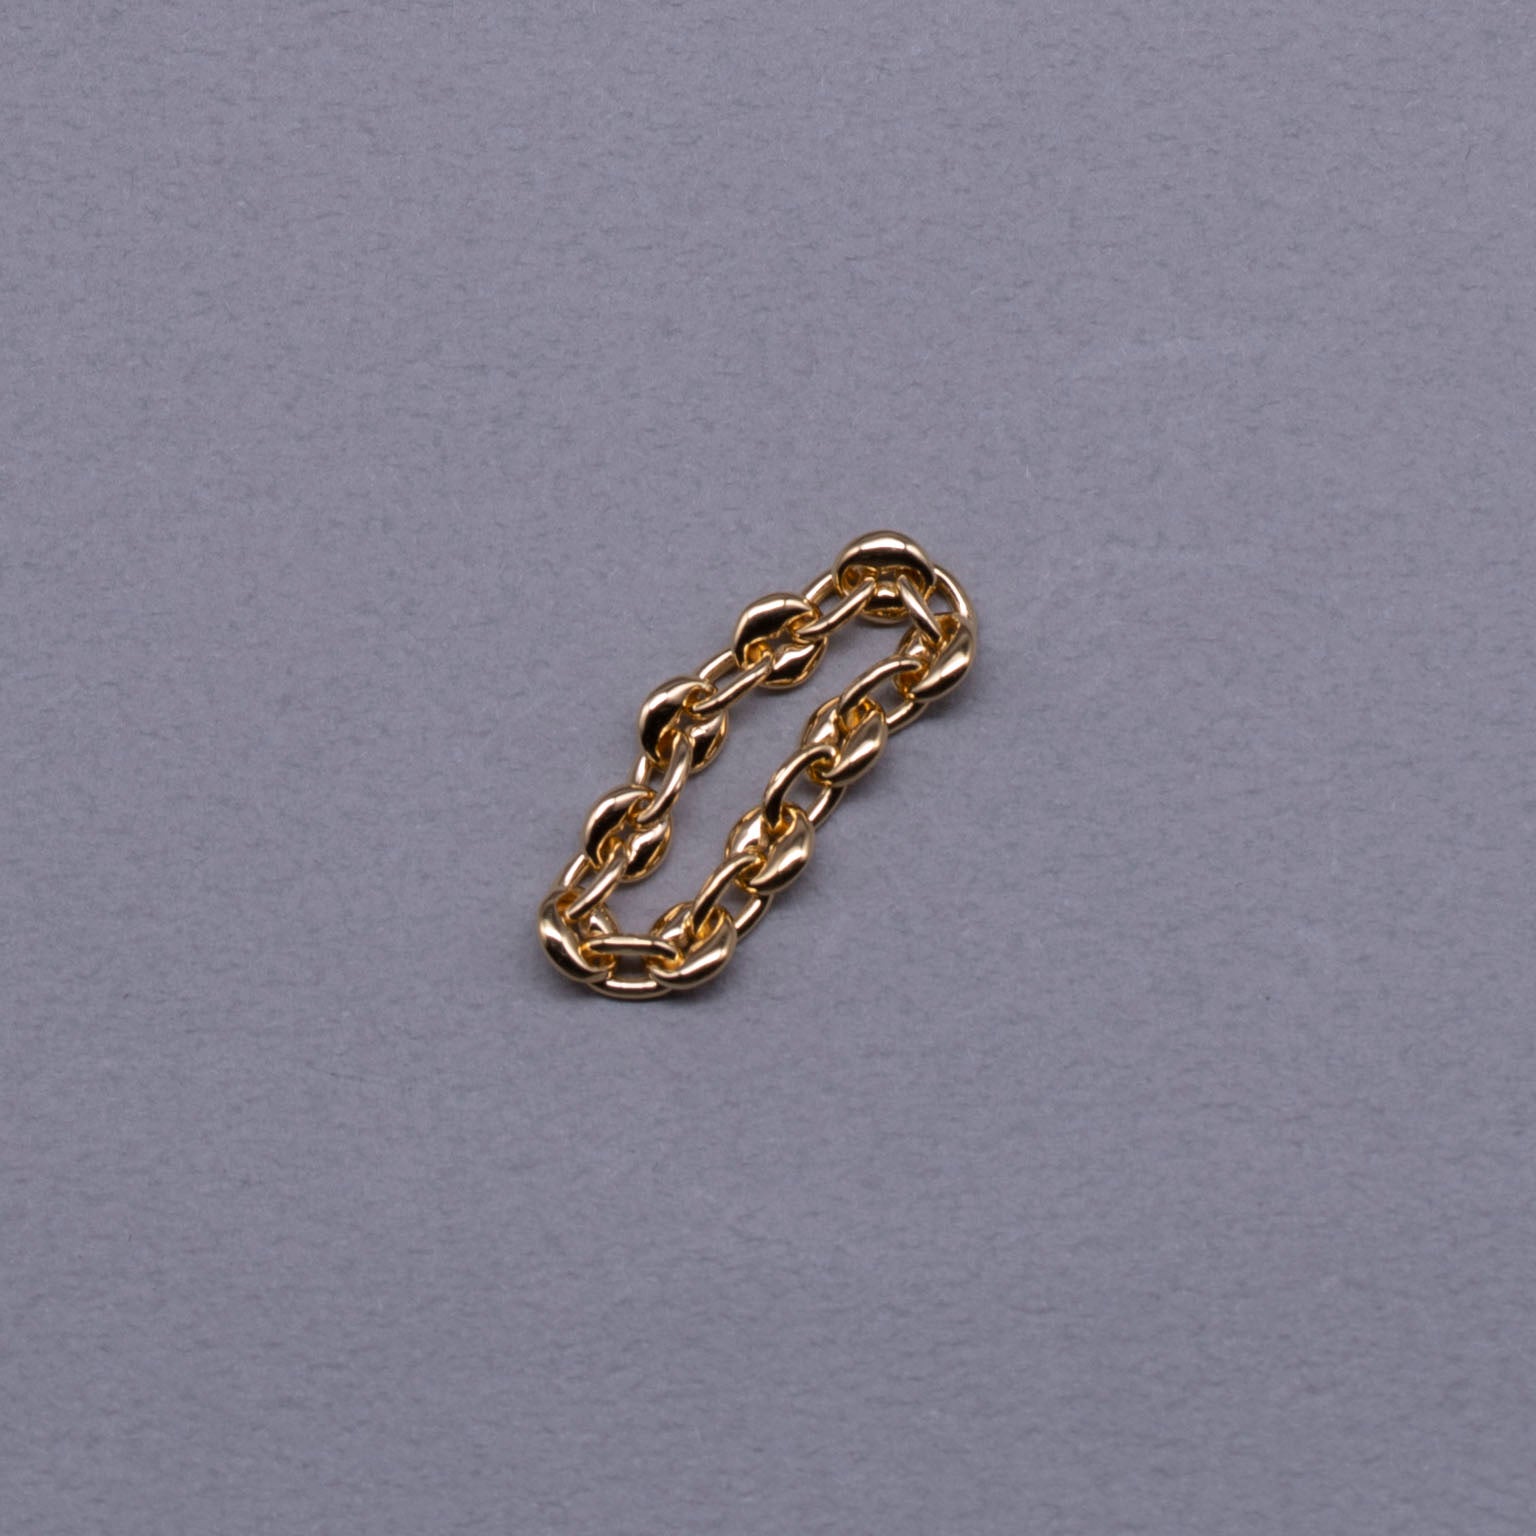 8hole ring Small Gold